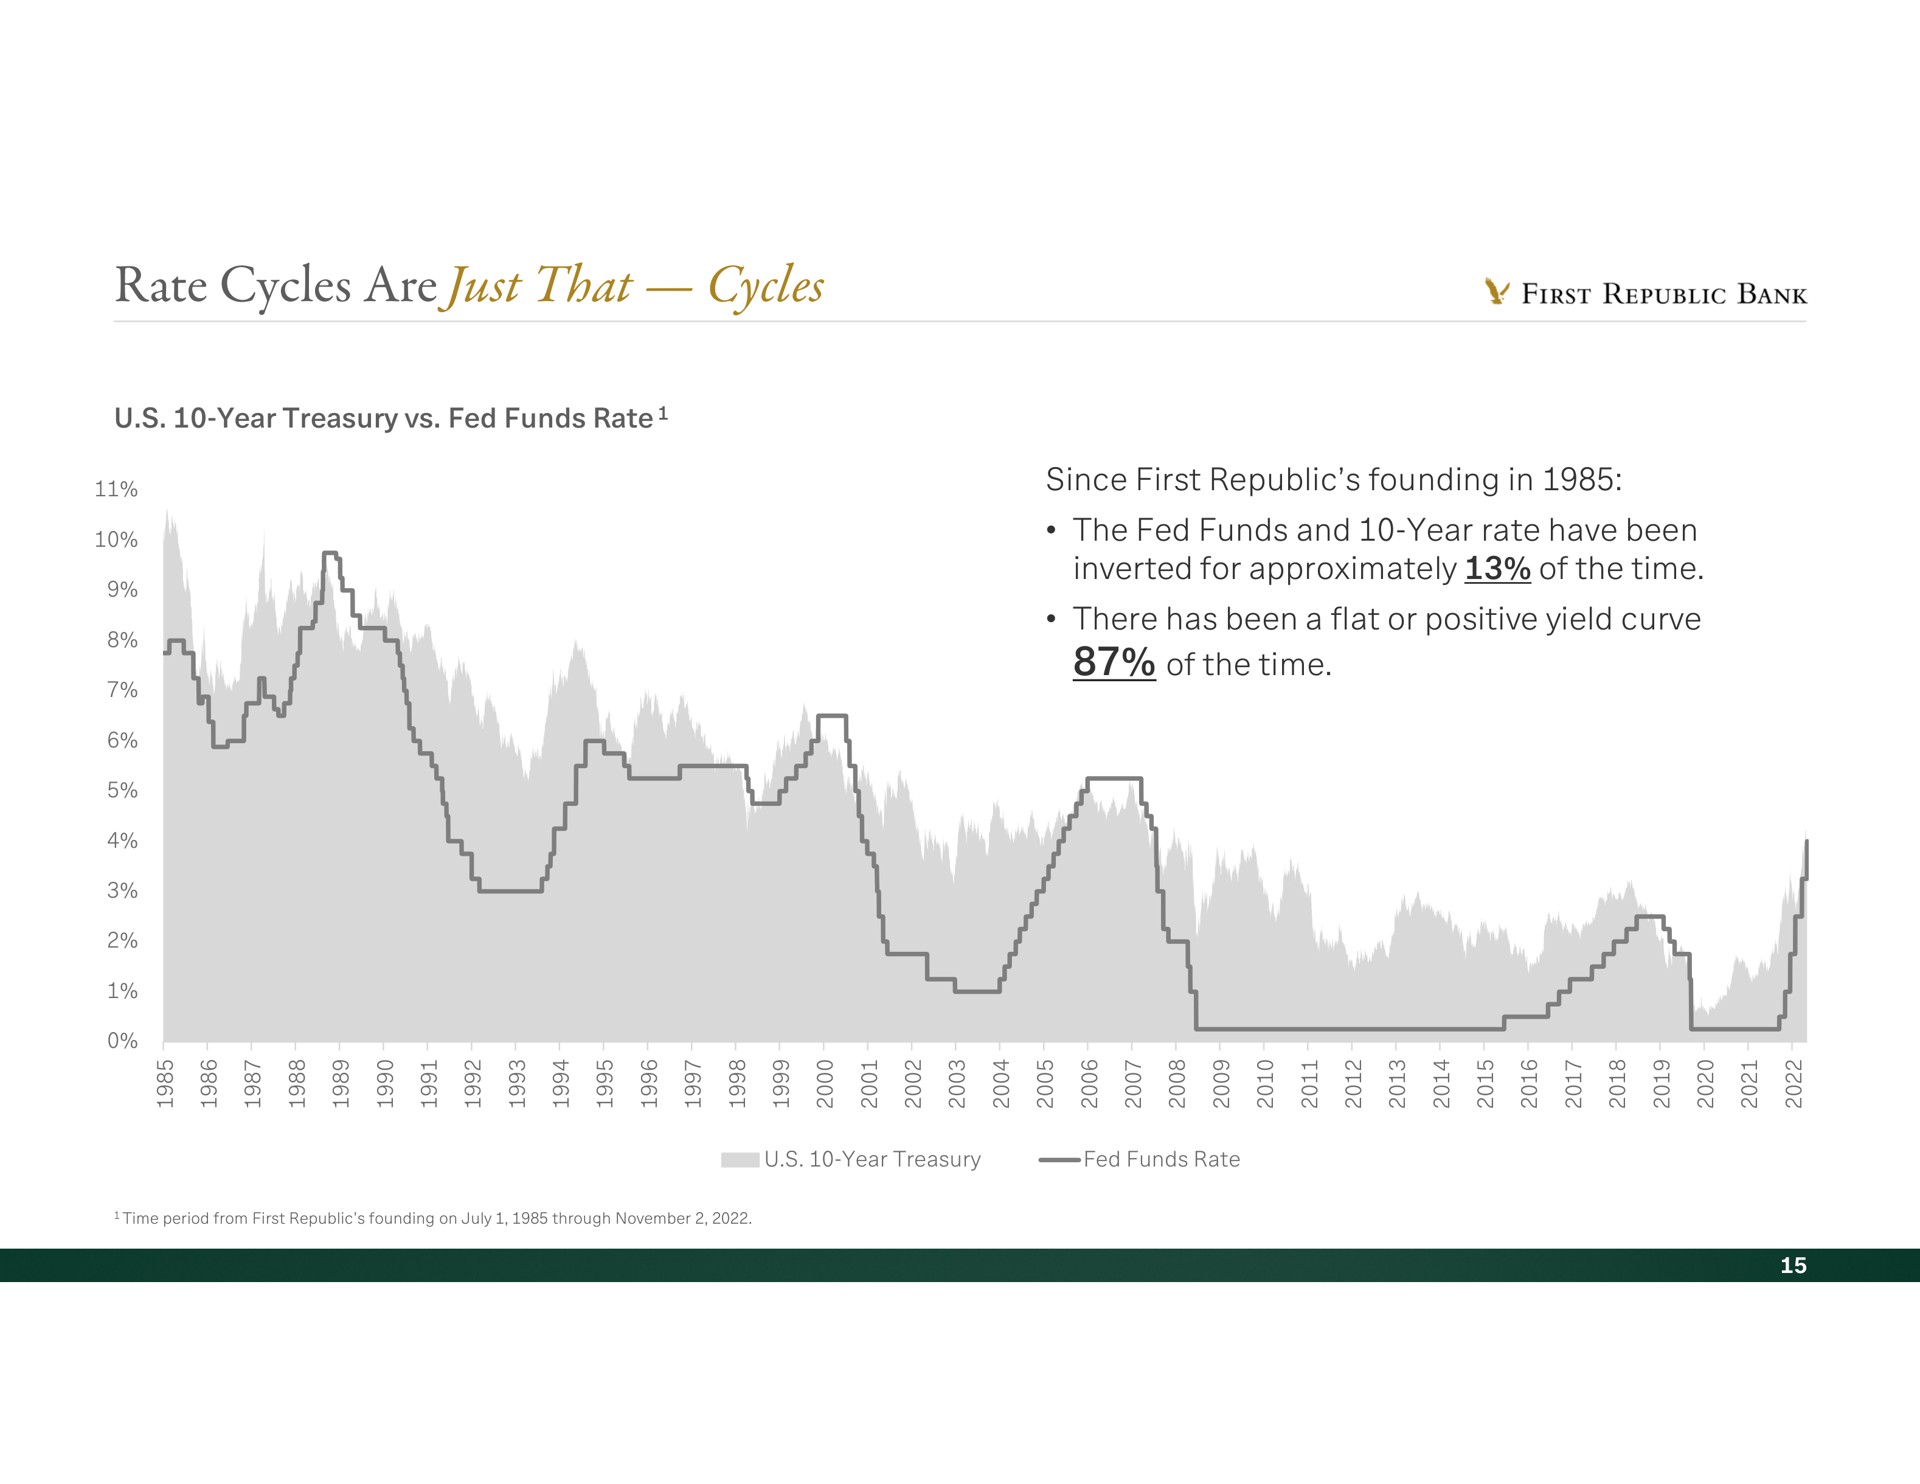 rate cycles are just that cycles first bank of the time | First Republic Bank